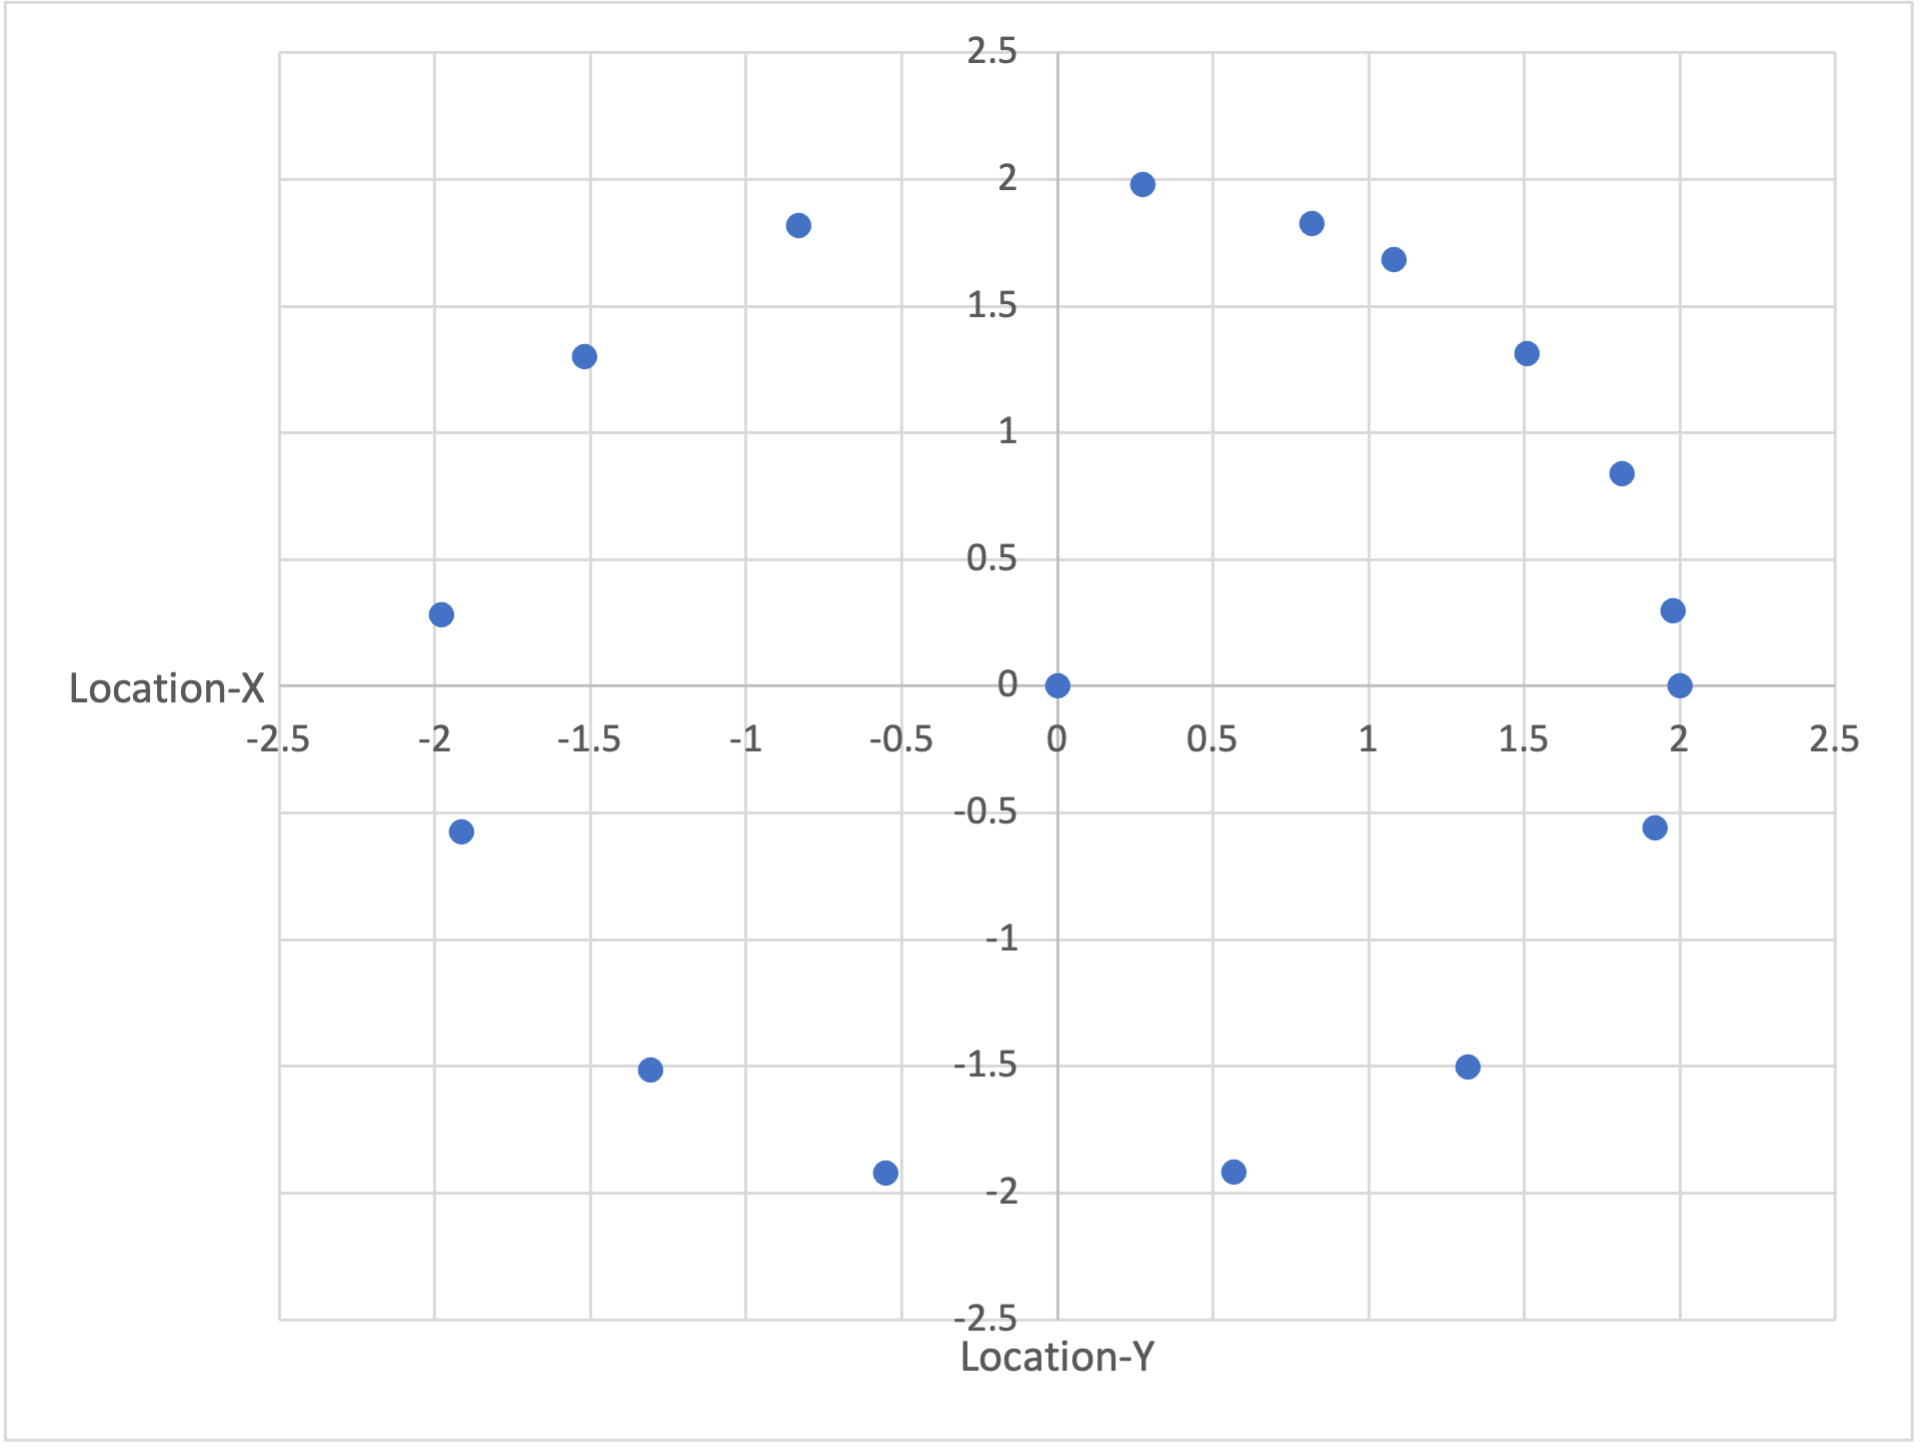 Graph of Location-X and Location-Y coordinates plotted.